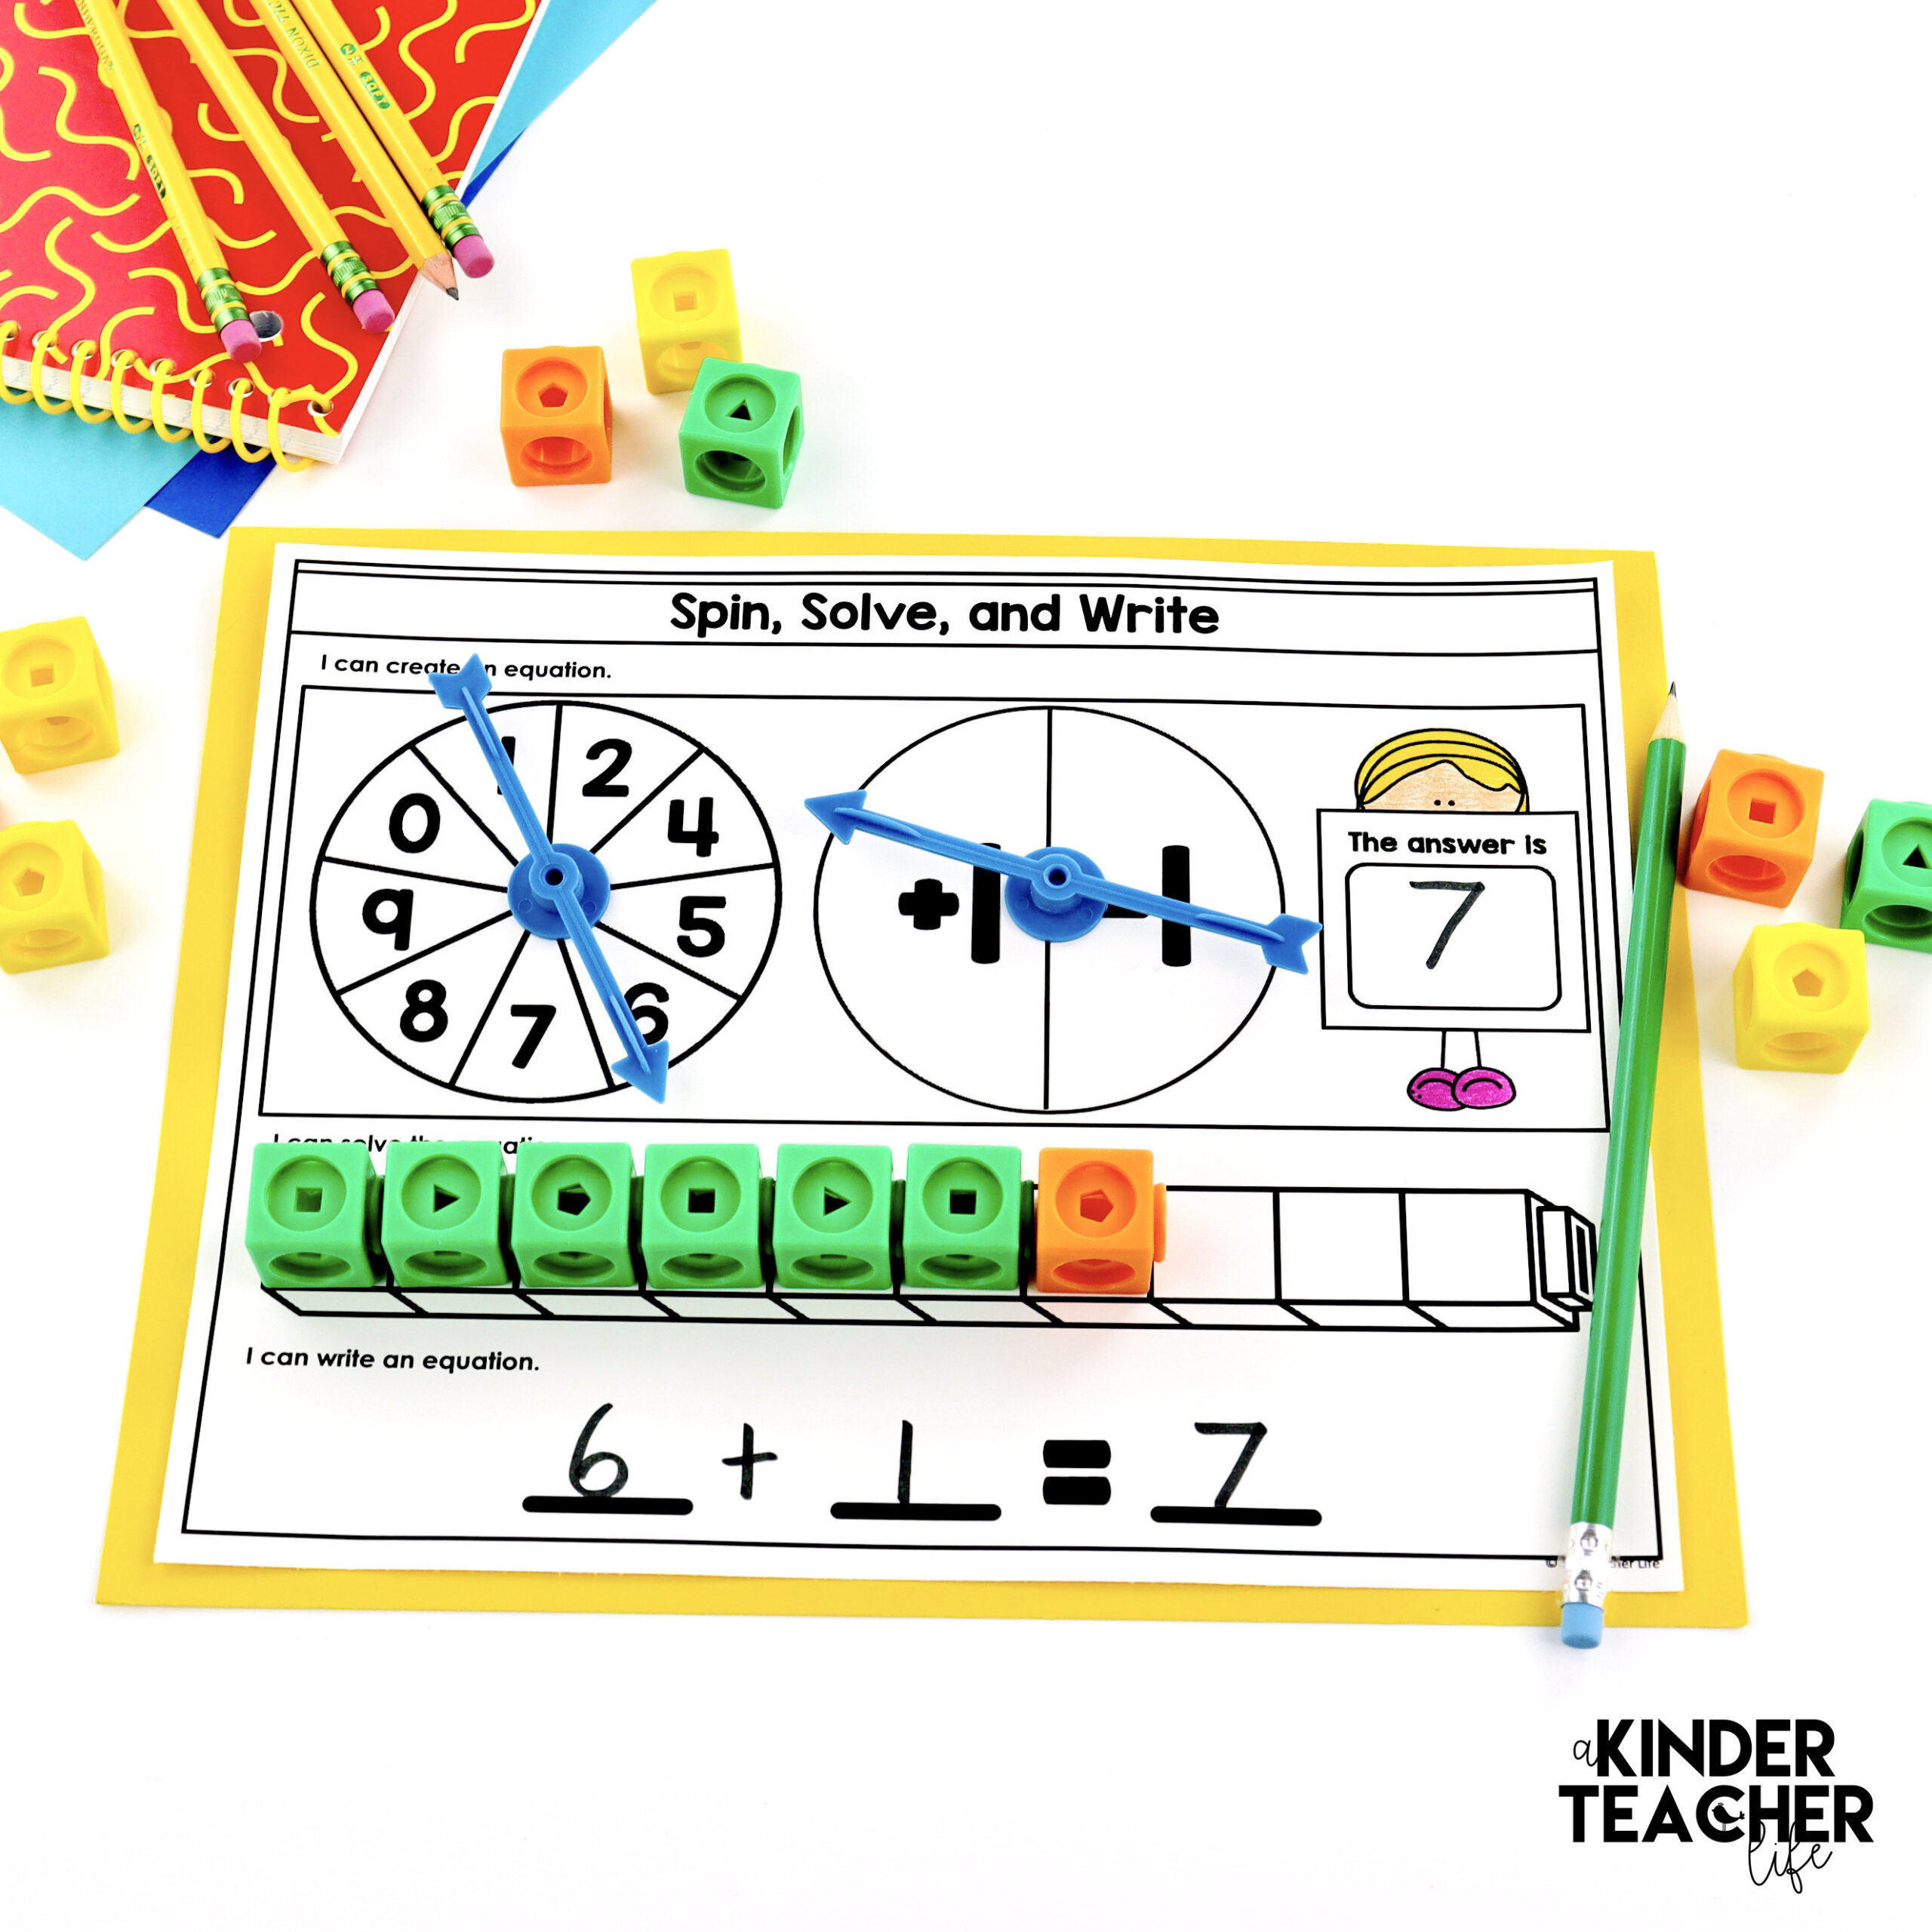 Must-Have Math Tools for your math instruction